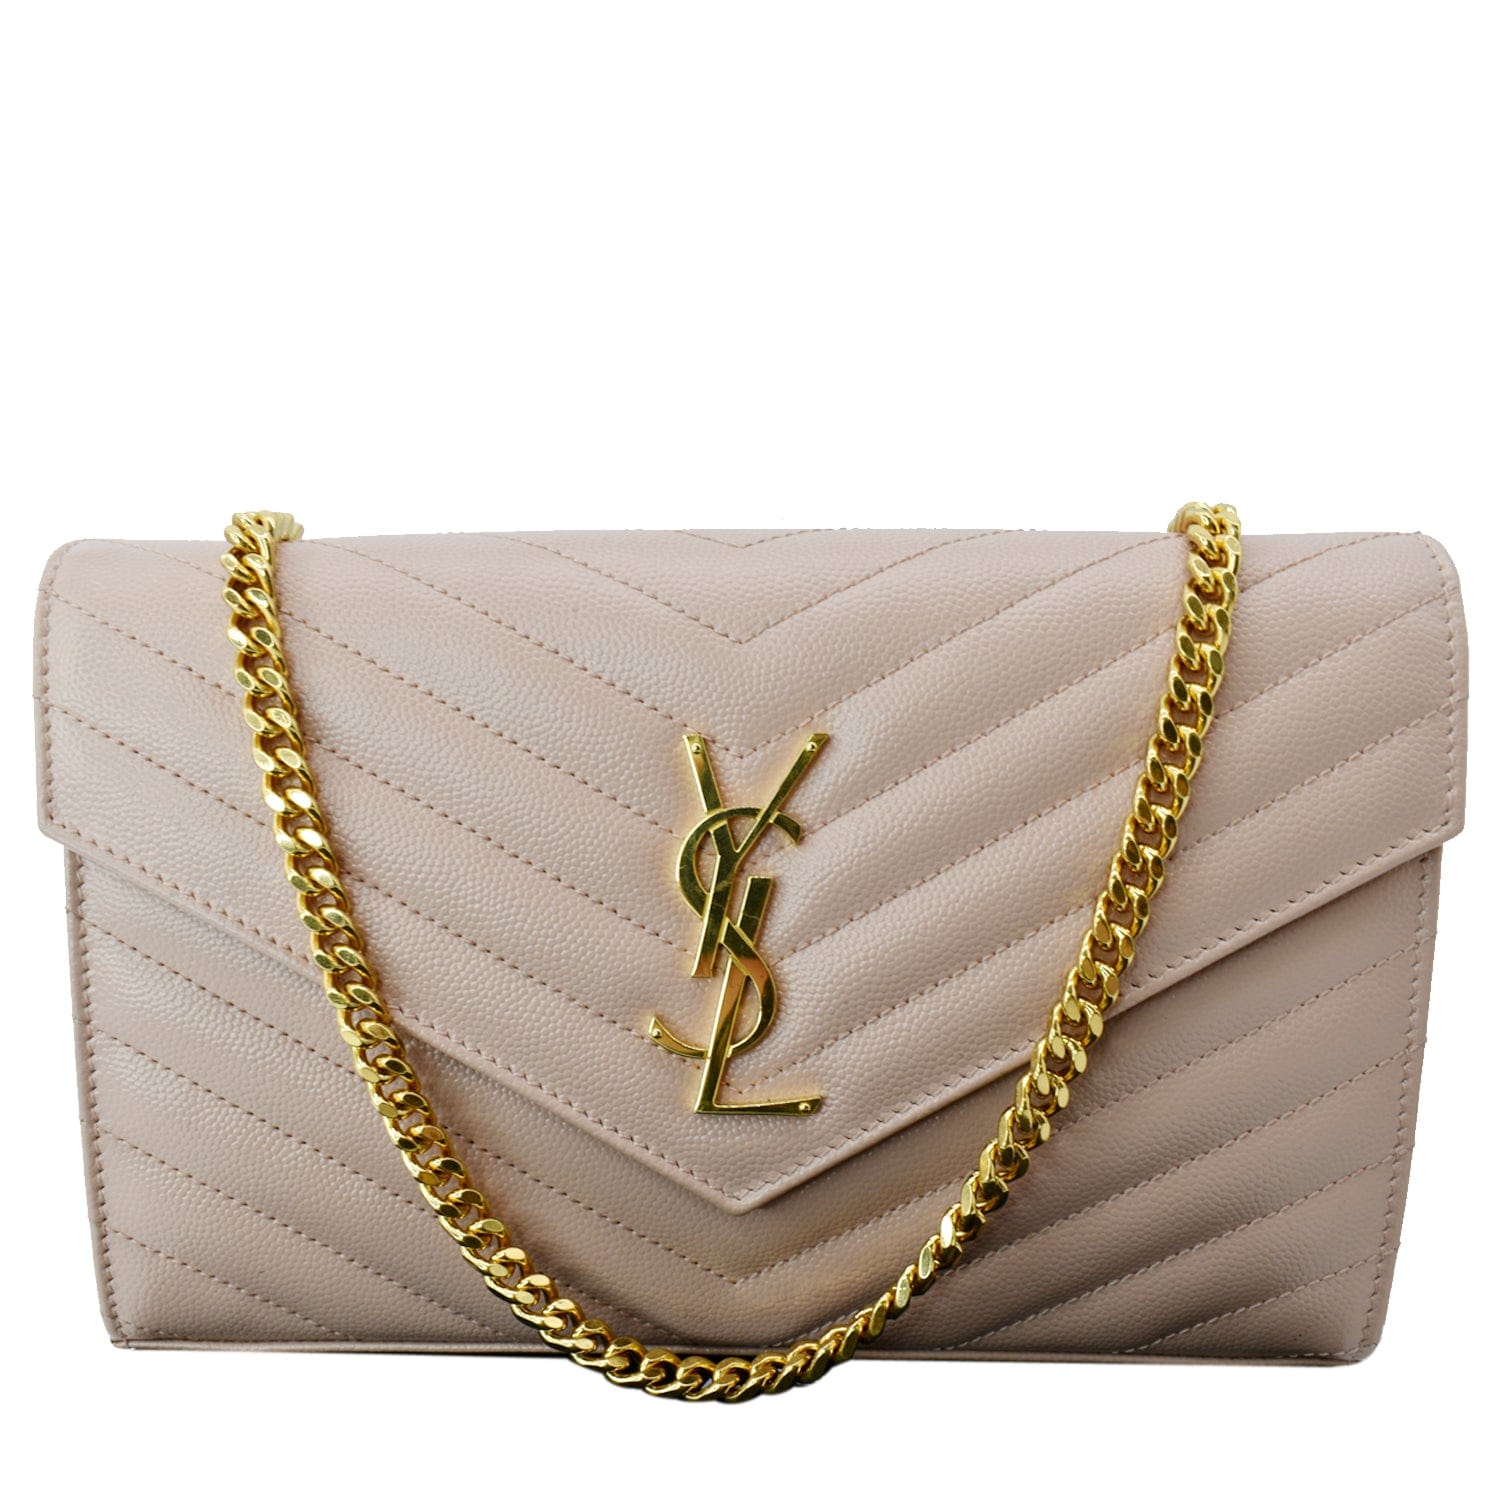 ysl wallet on chain bag